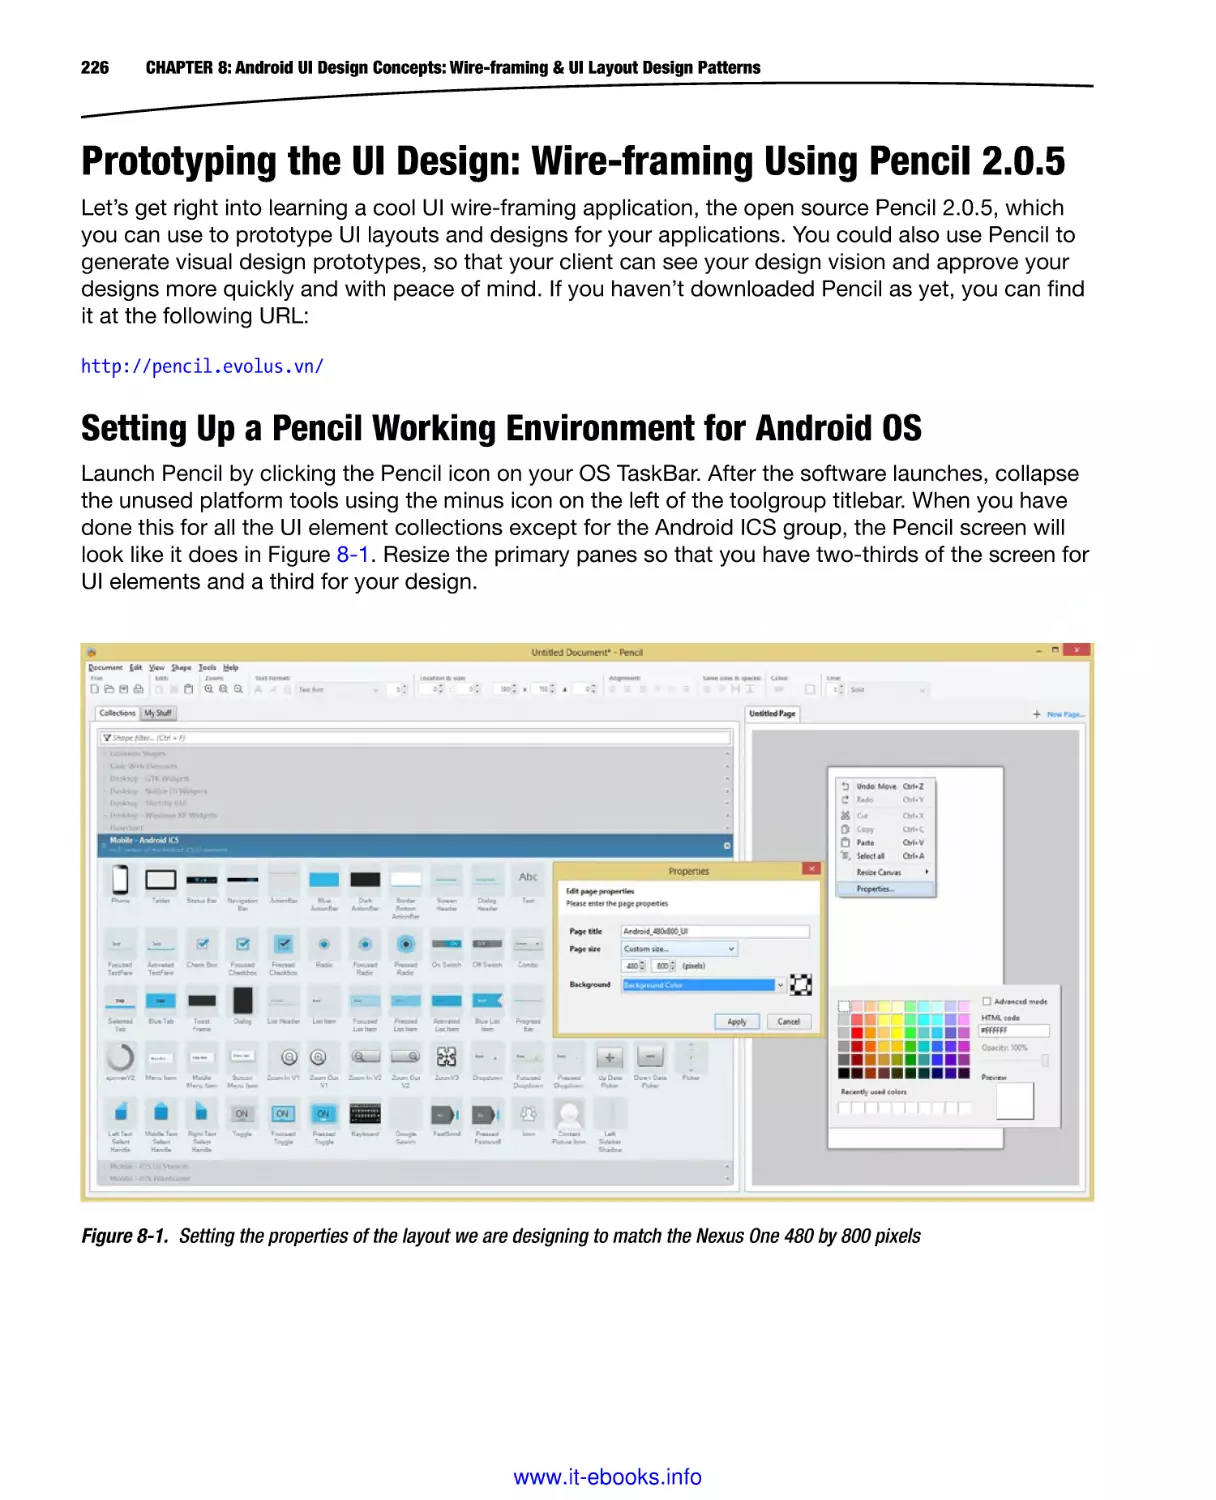 Prototyping the UI Design
Setting Up a Pencil Working Environment for Android OS